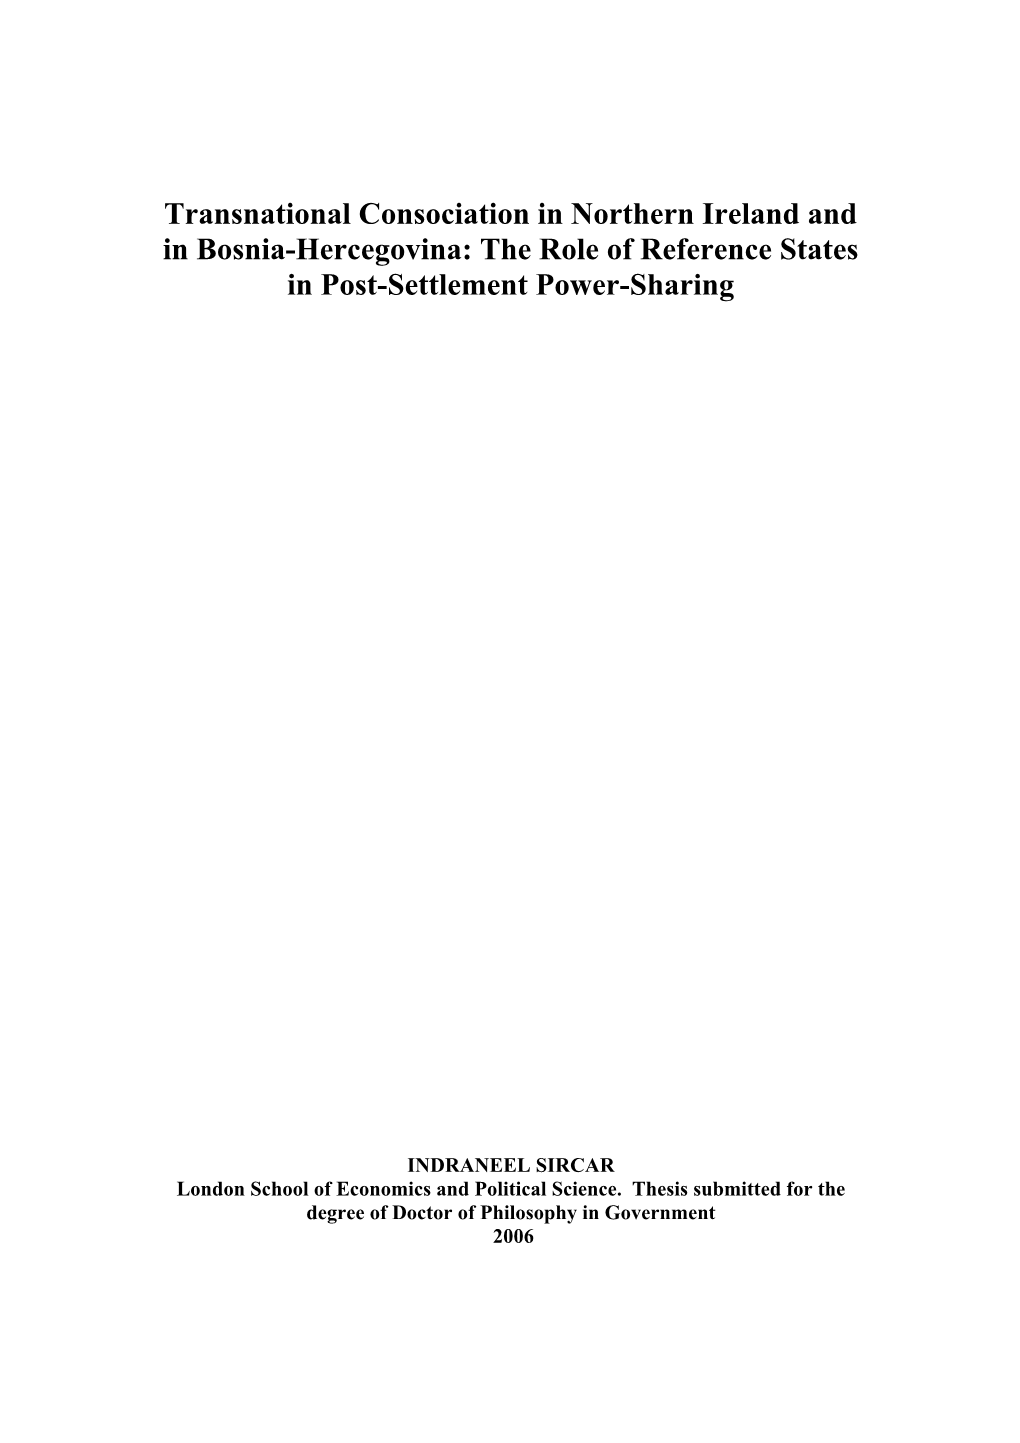 Transnational Consociation in Northern Ireland and in Bosnia-Hercegovina: the Role of Reference States in Post-Settlement Power-Sharing